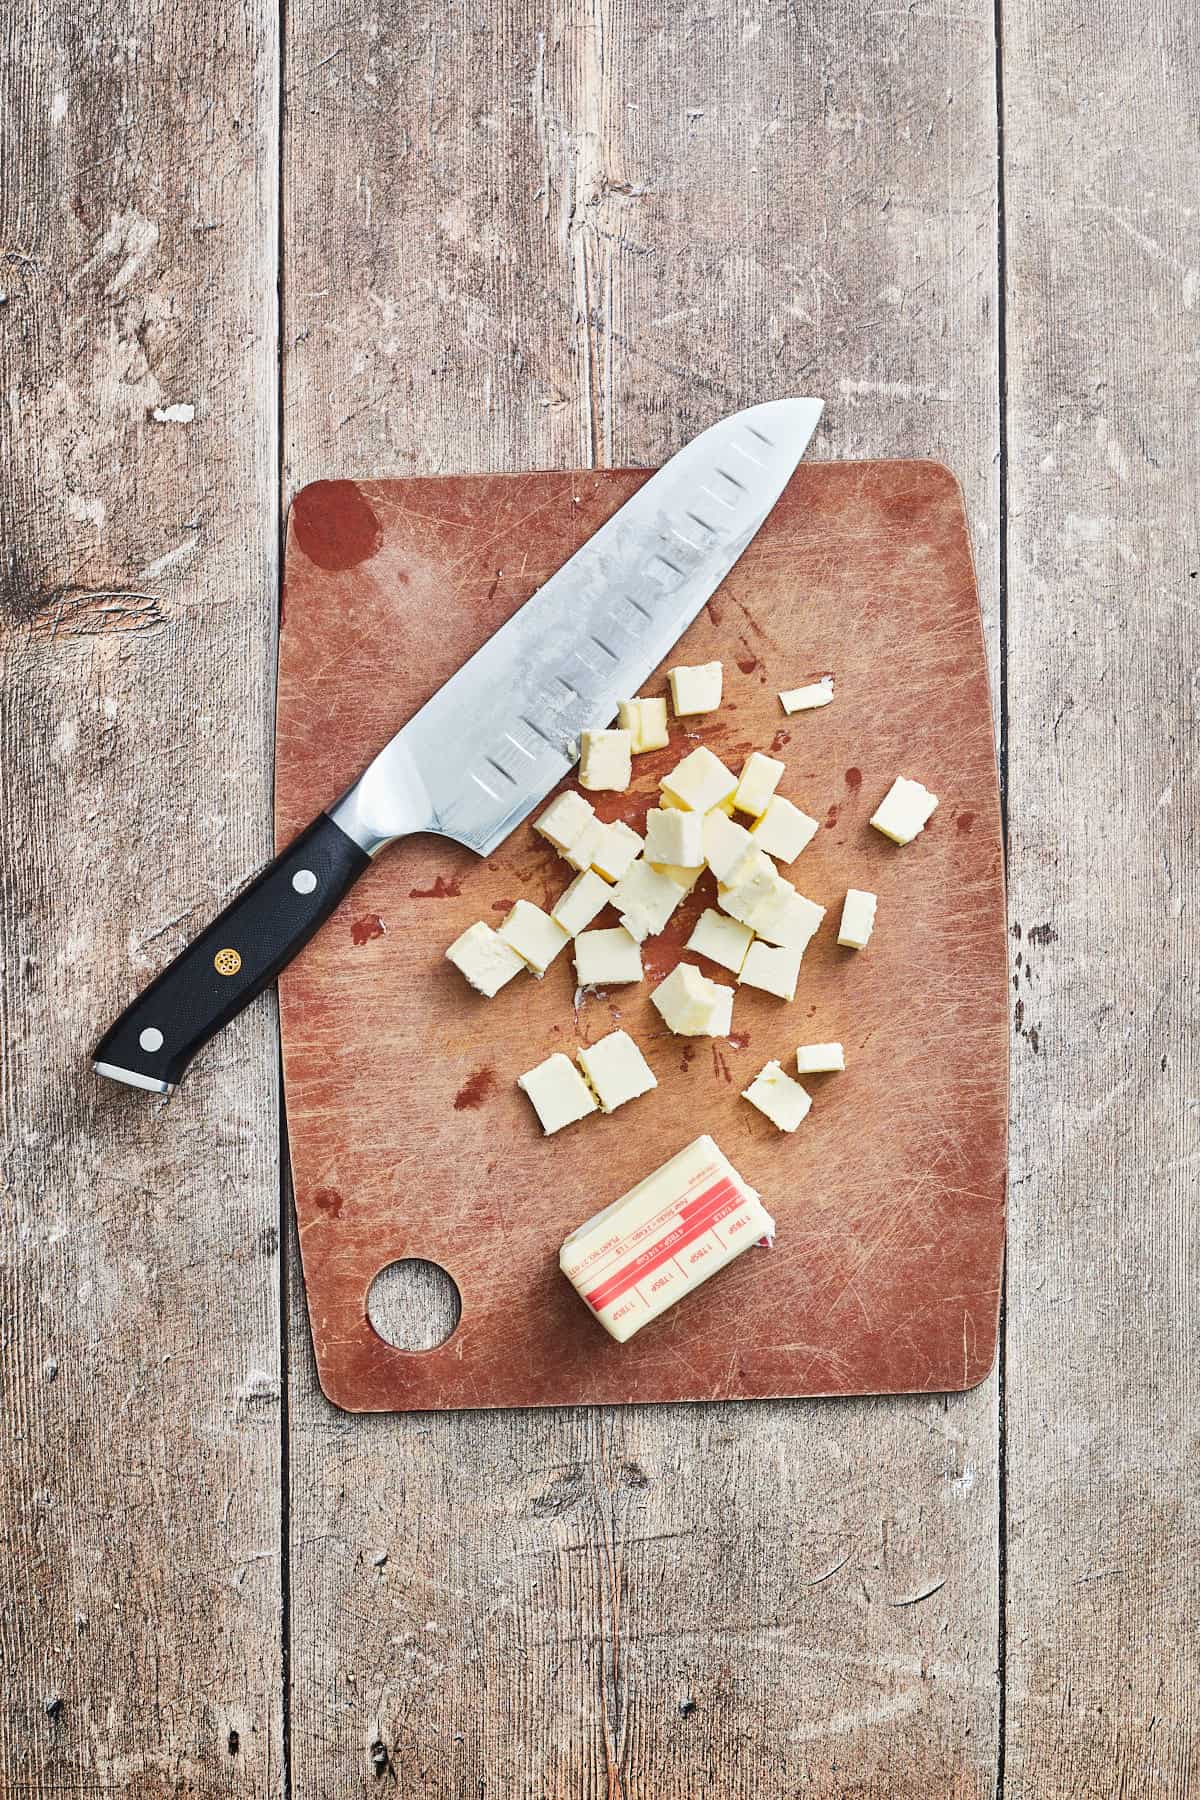 butter on a small cutting board with a knife cut into small cubes